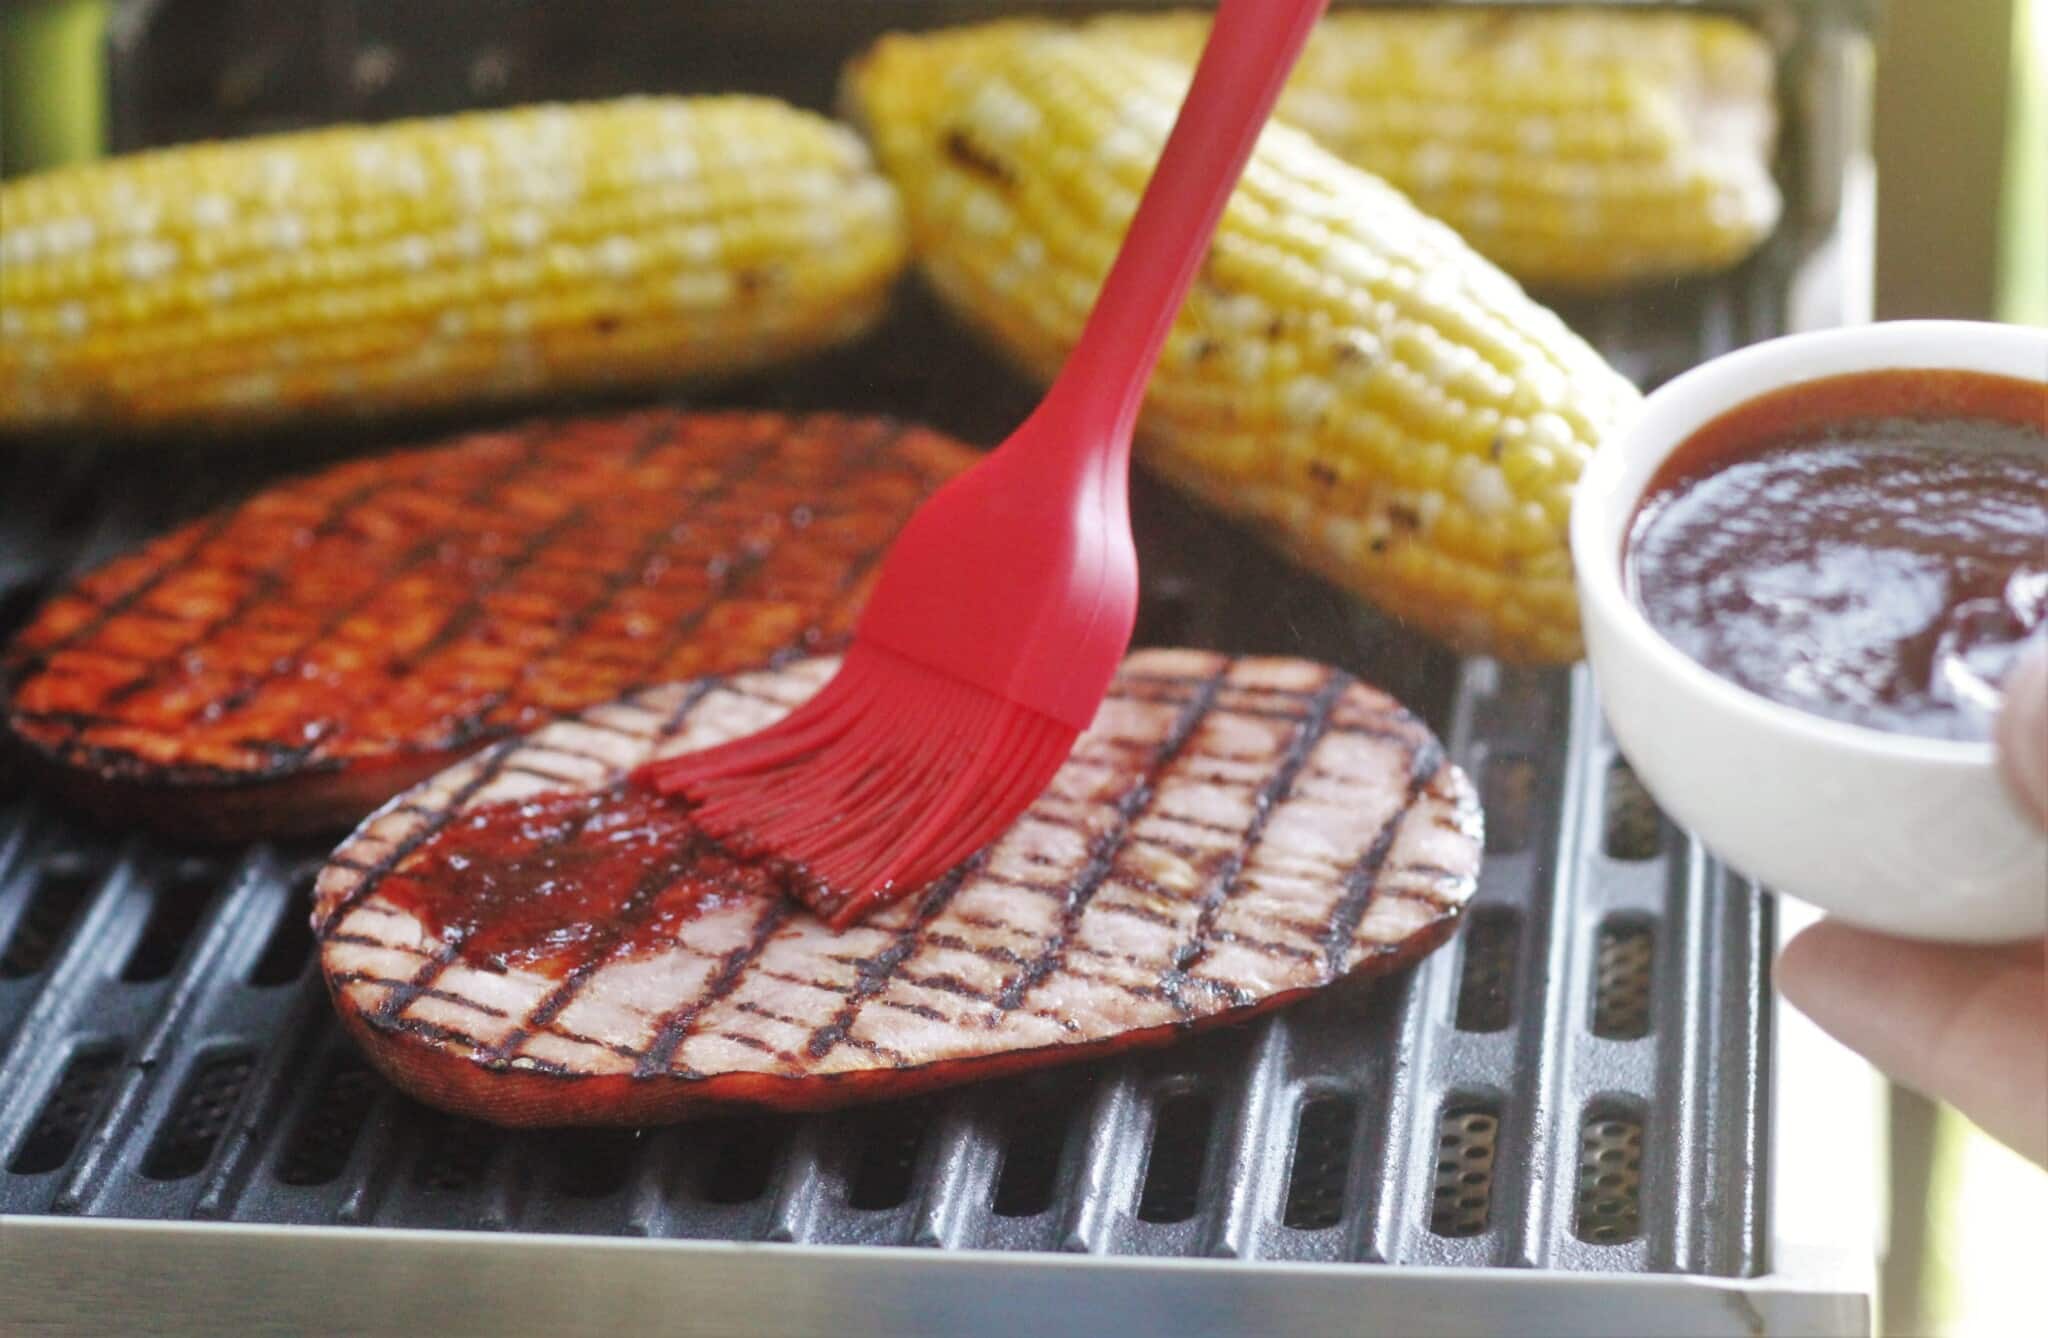 A red silicone basting brush brushing glaze onto two hamsteaks on grill next to 3 cobs of corn.